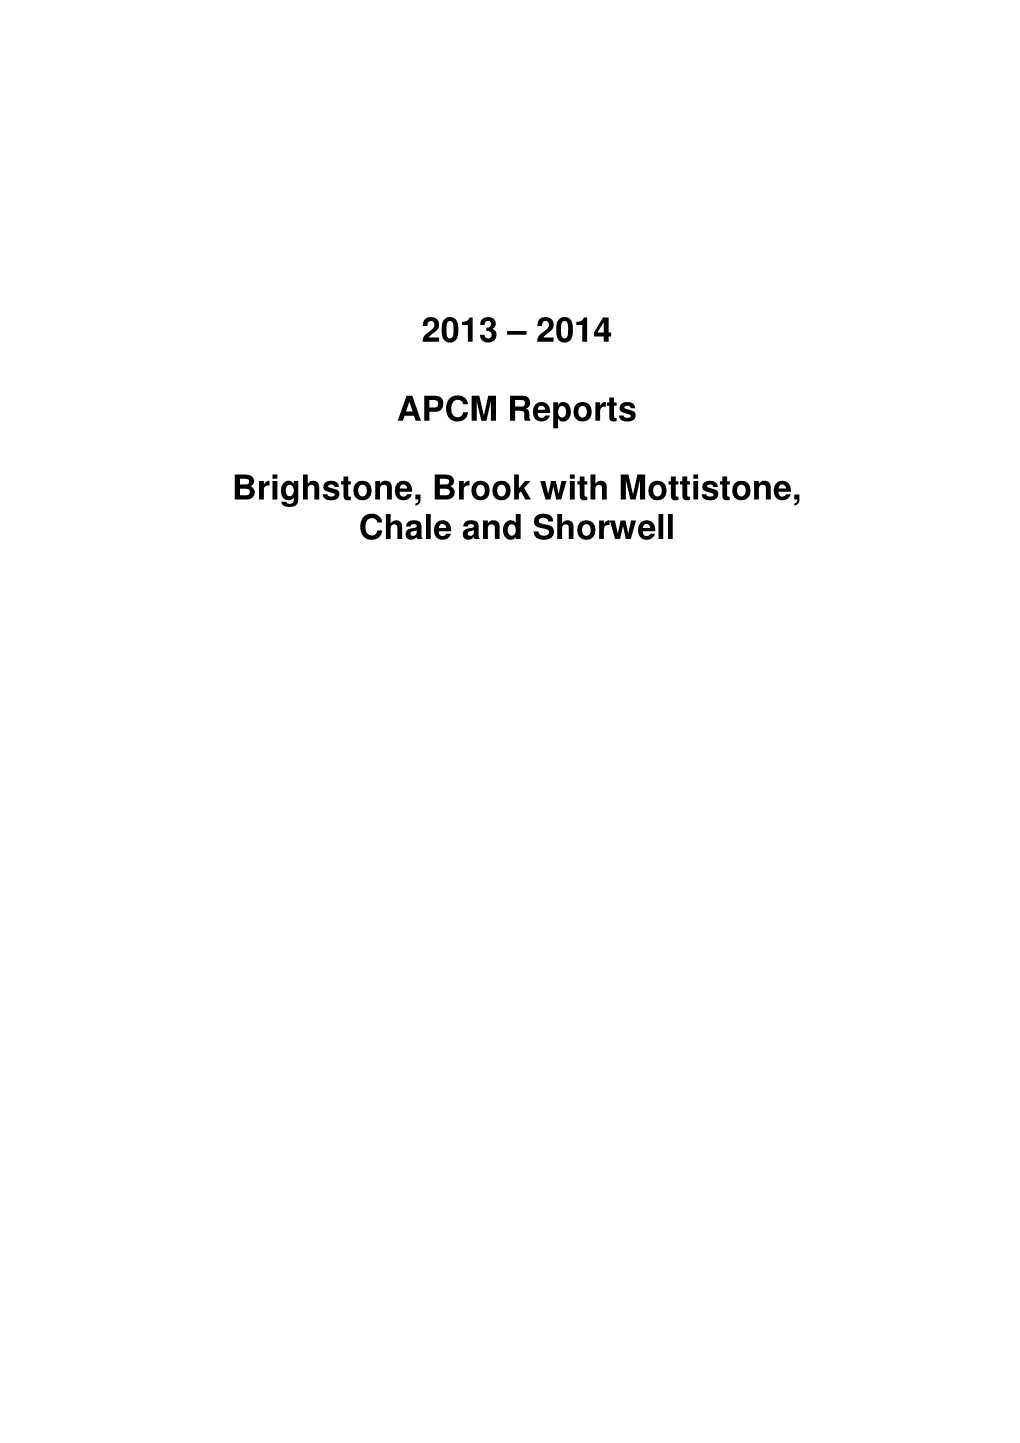 2013 – 2014 APCM Reports Brighstone, Brook with Mottistone, Chale and Shorwell